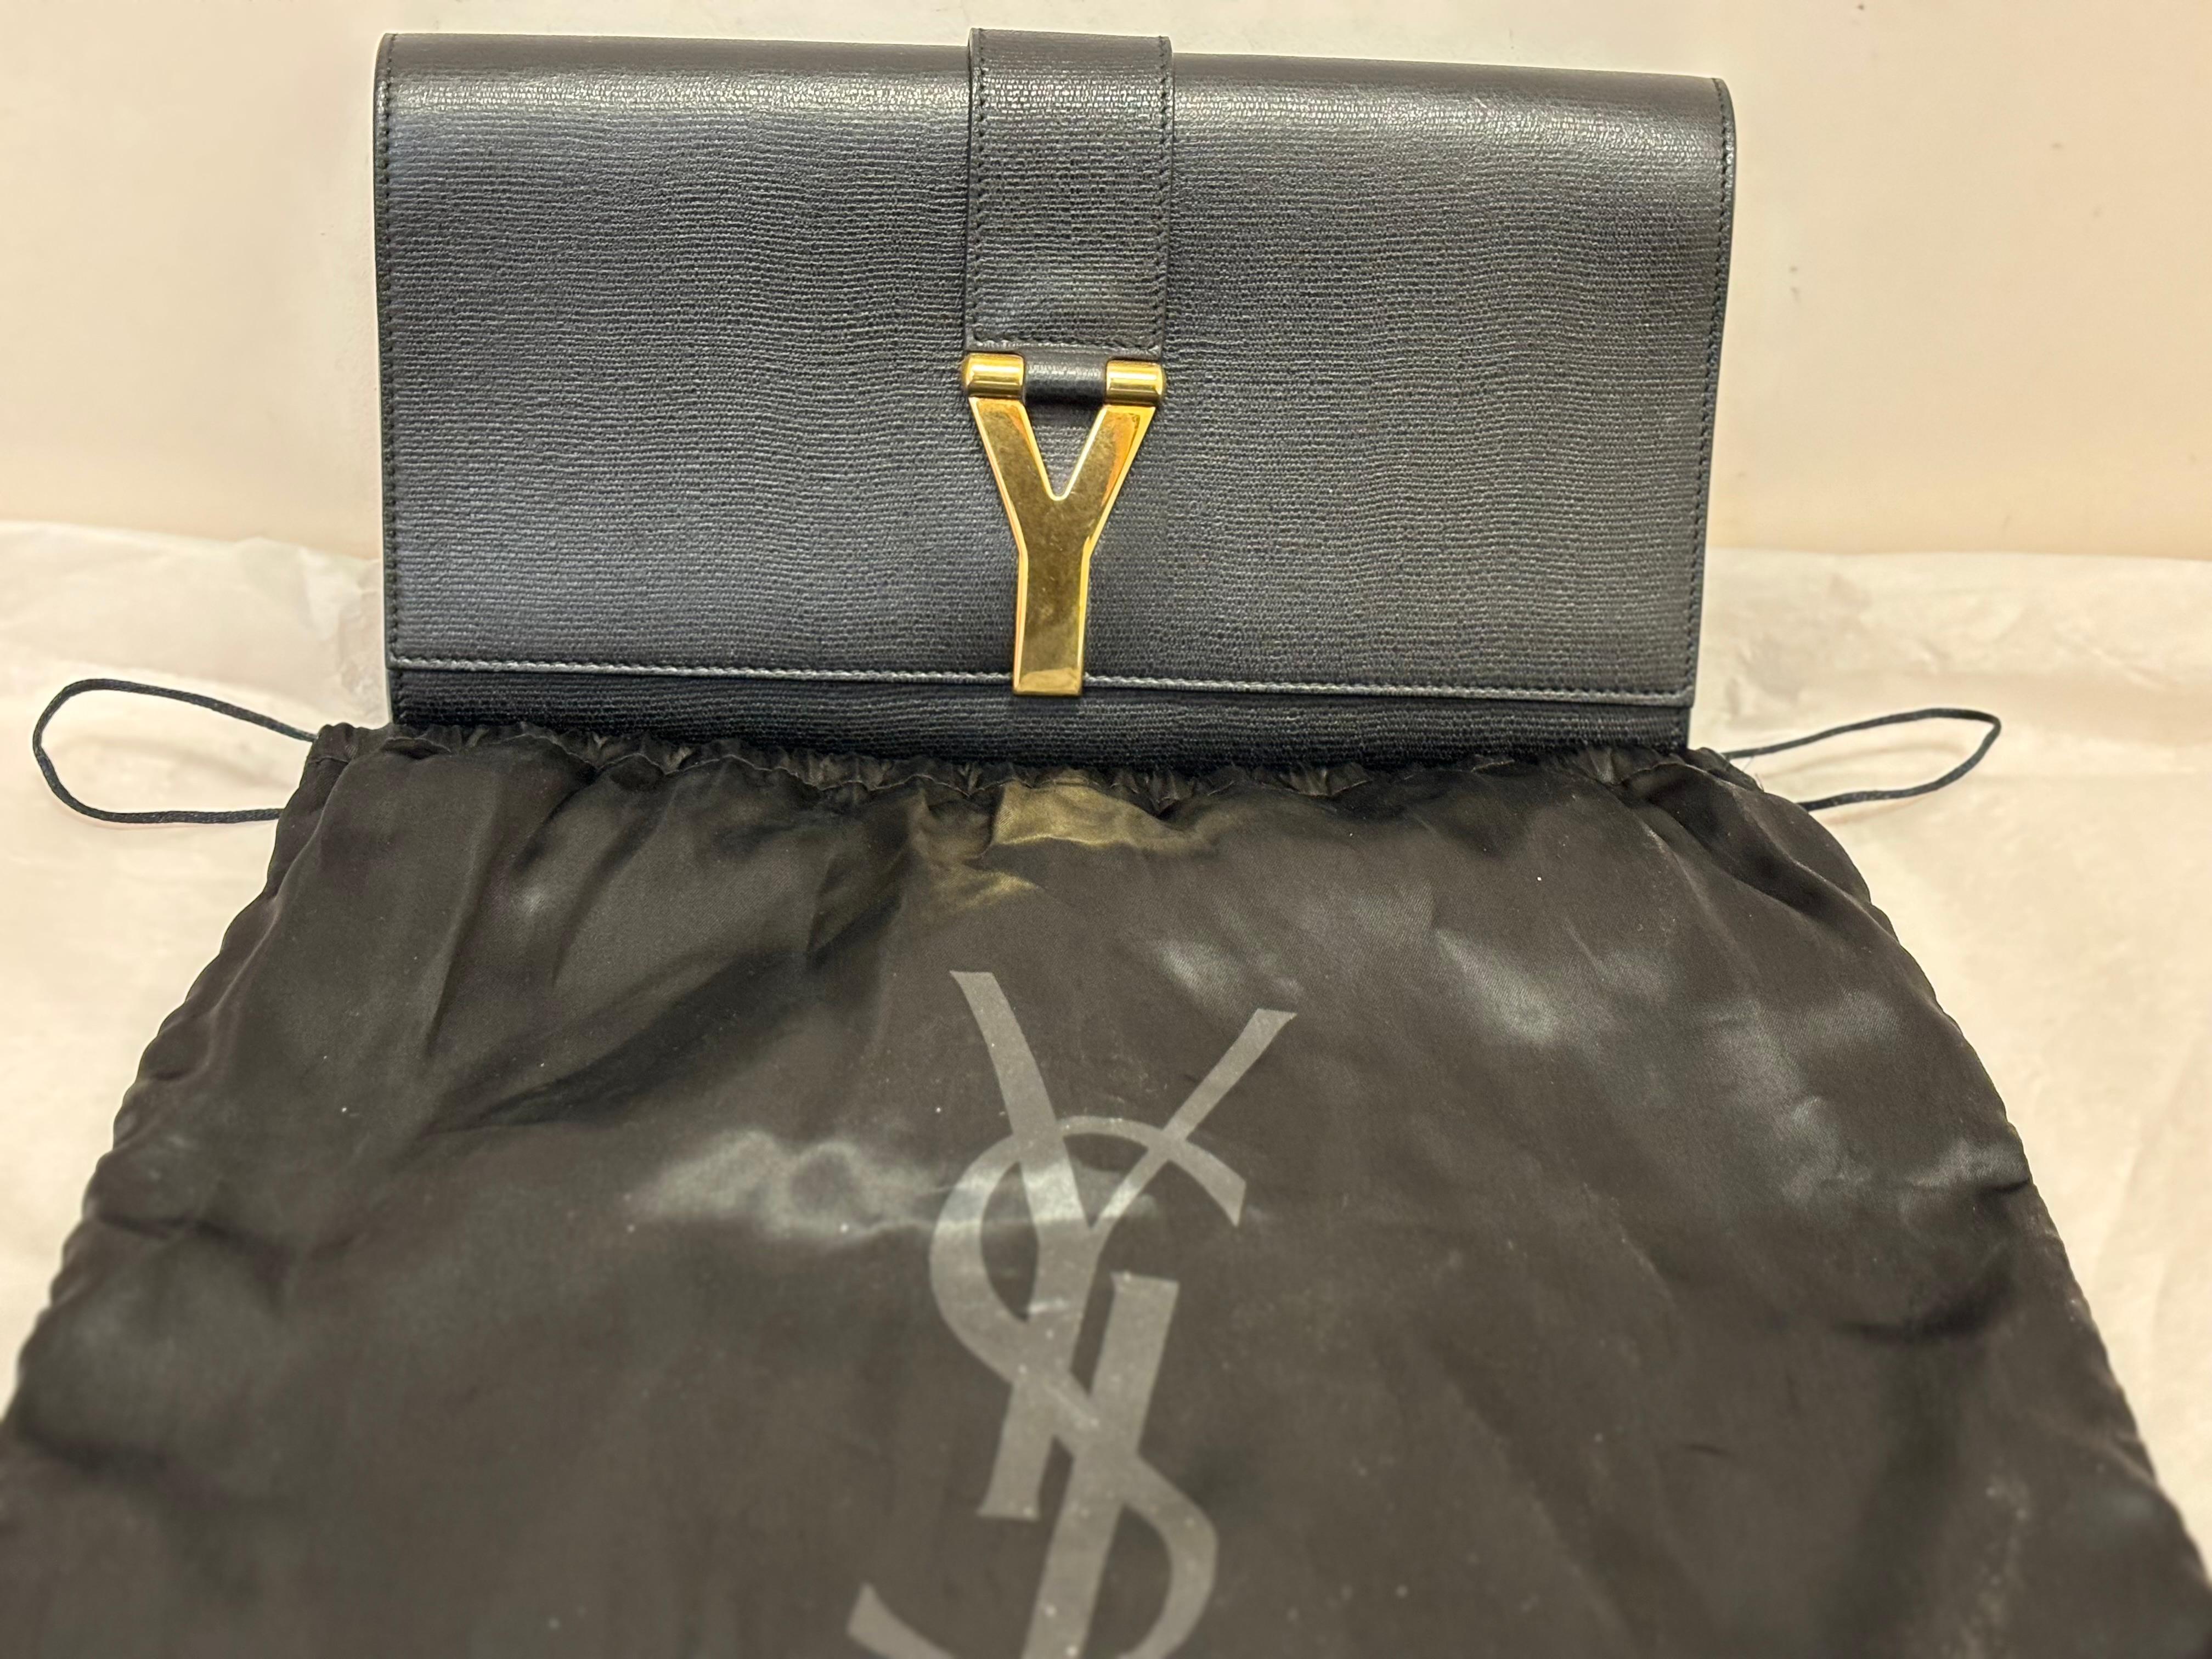 Typical YSL bag, simple lines and muted sophistication. This YSL Y Ligne clutch was designed by Tom Ford and is made of textured leather.
This clutch has a front magnetic flap, featuring a gold-tone Y, the interior is satin lined with a patch